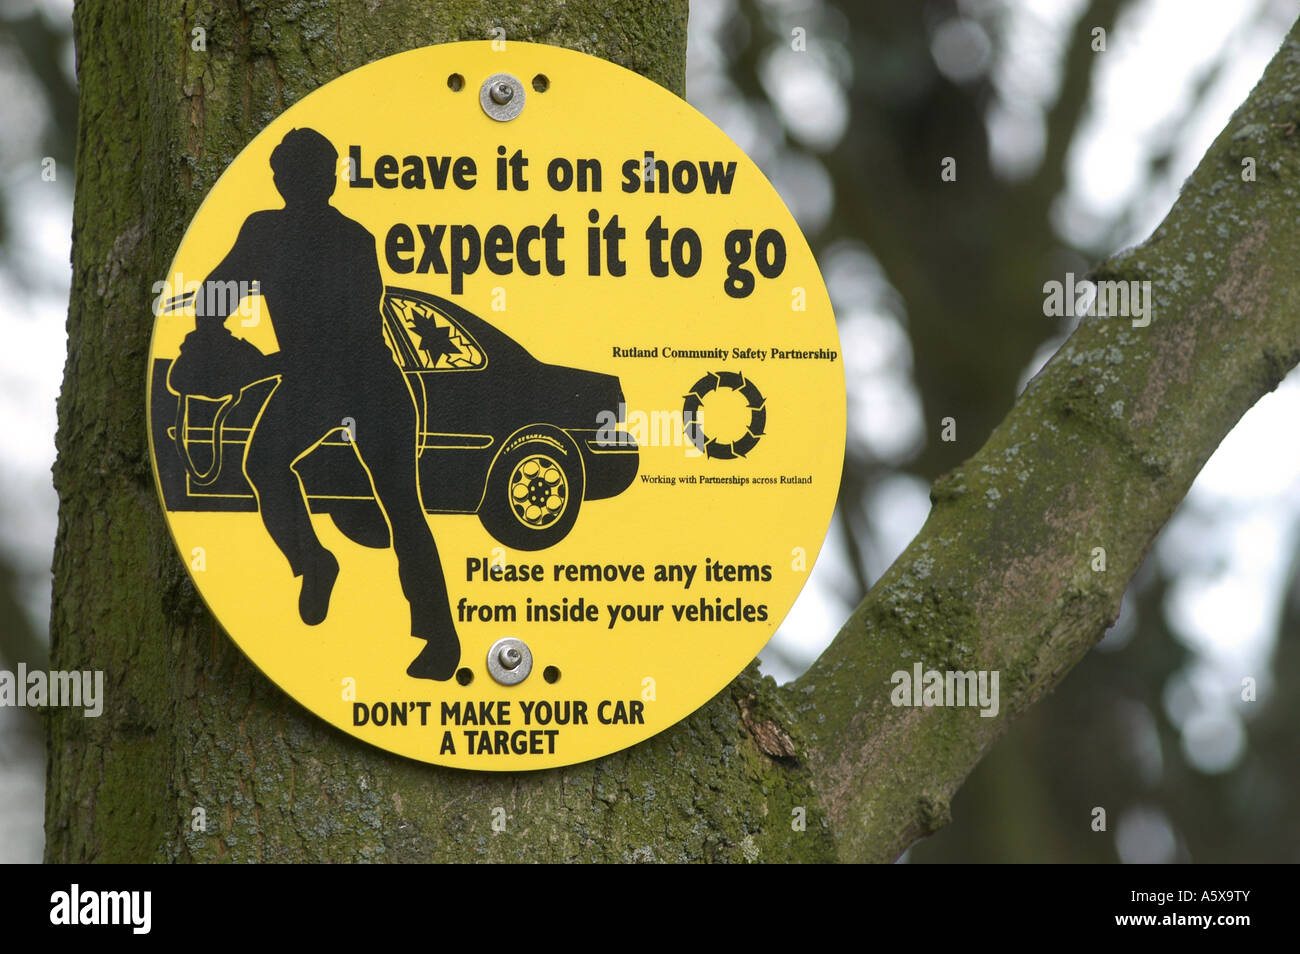 Warning sign about car theft in a car park to motorists in the uk Stock Photo